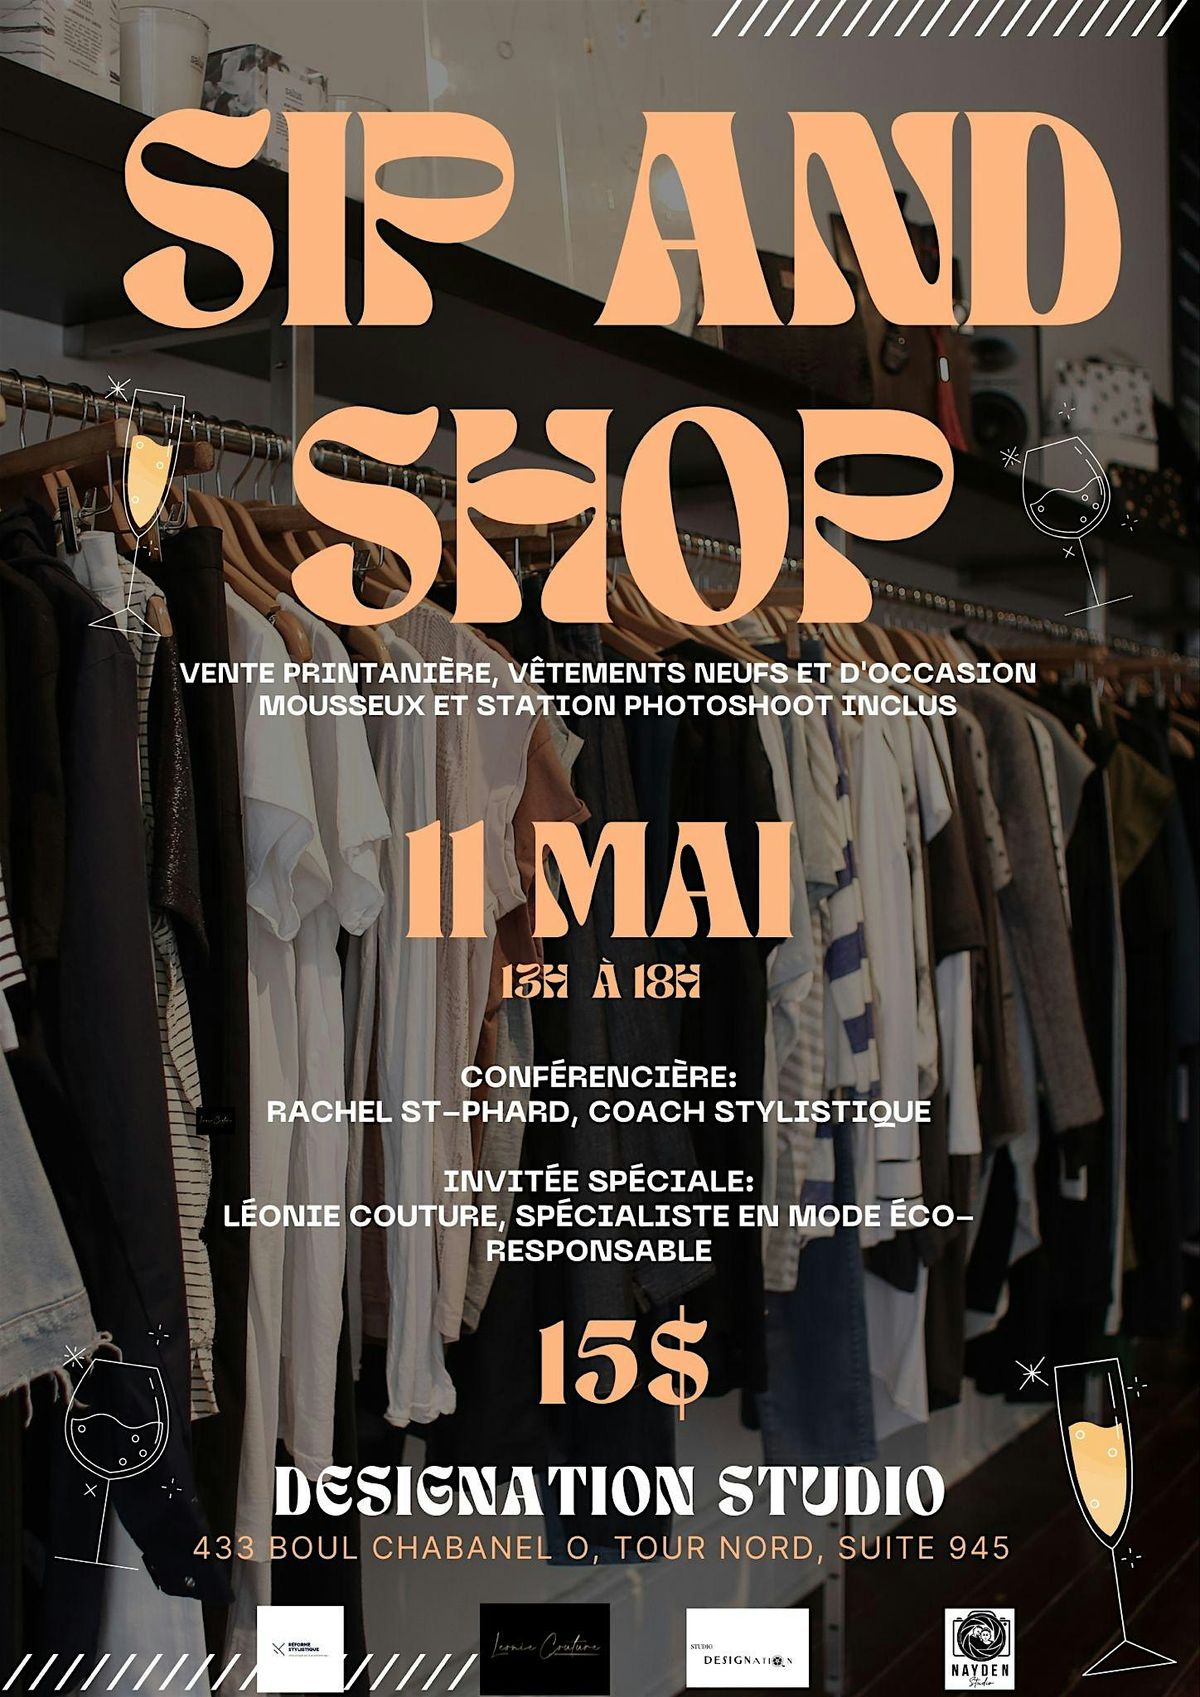 Sip and shop